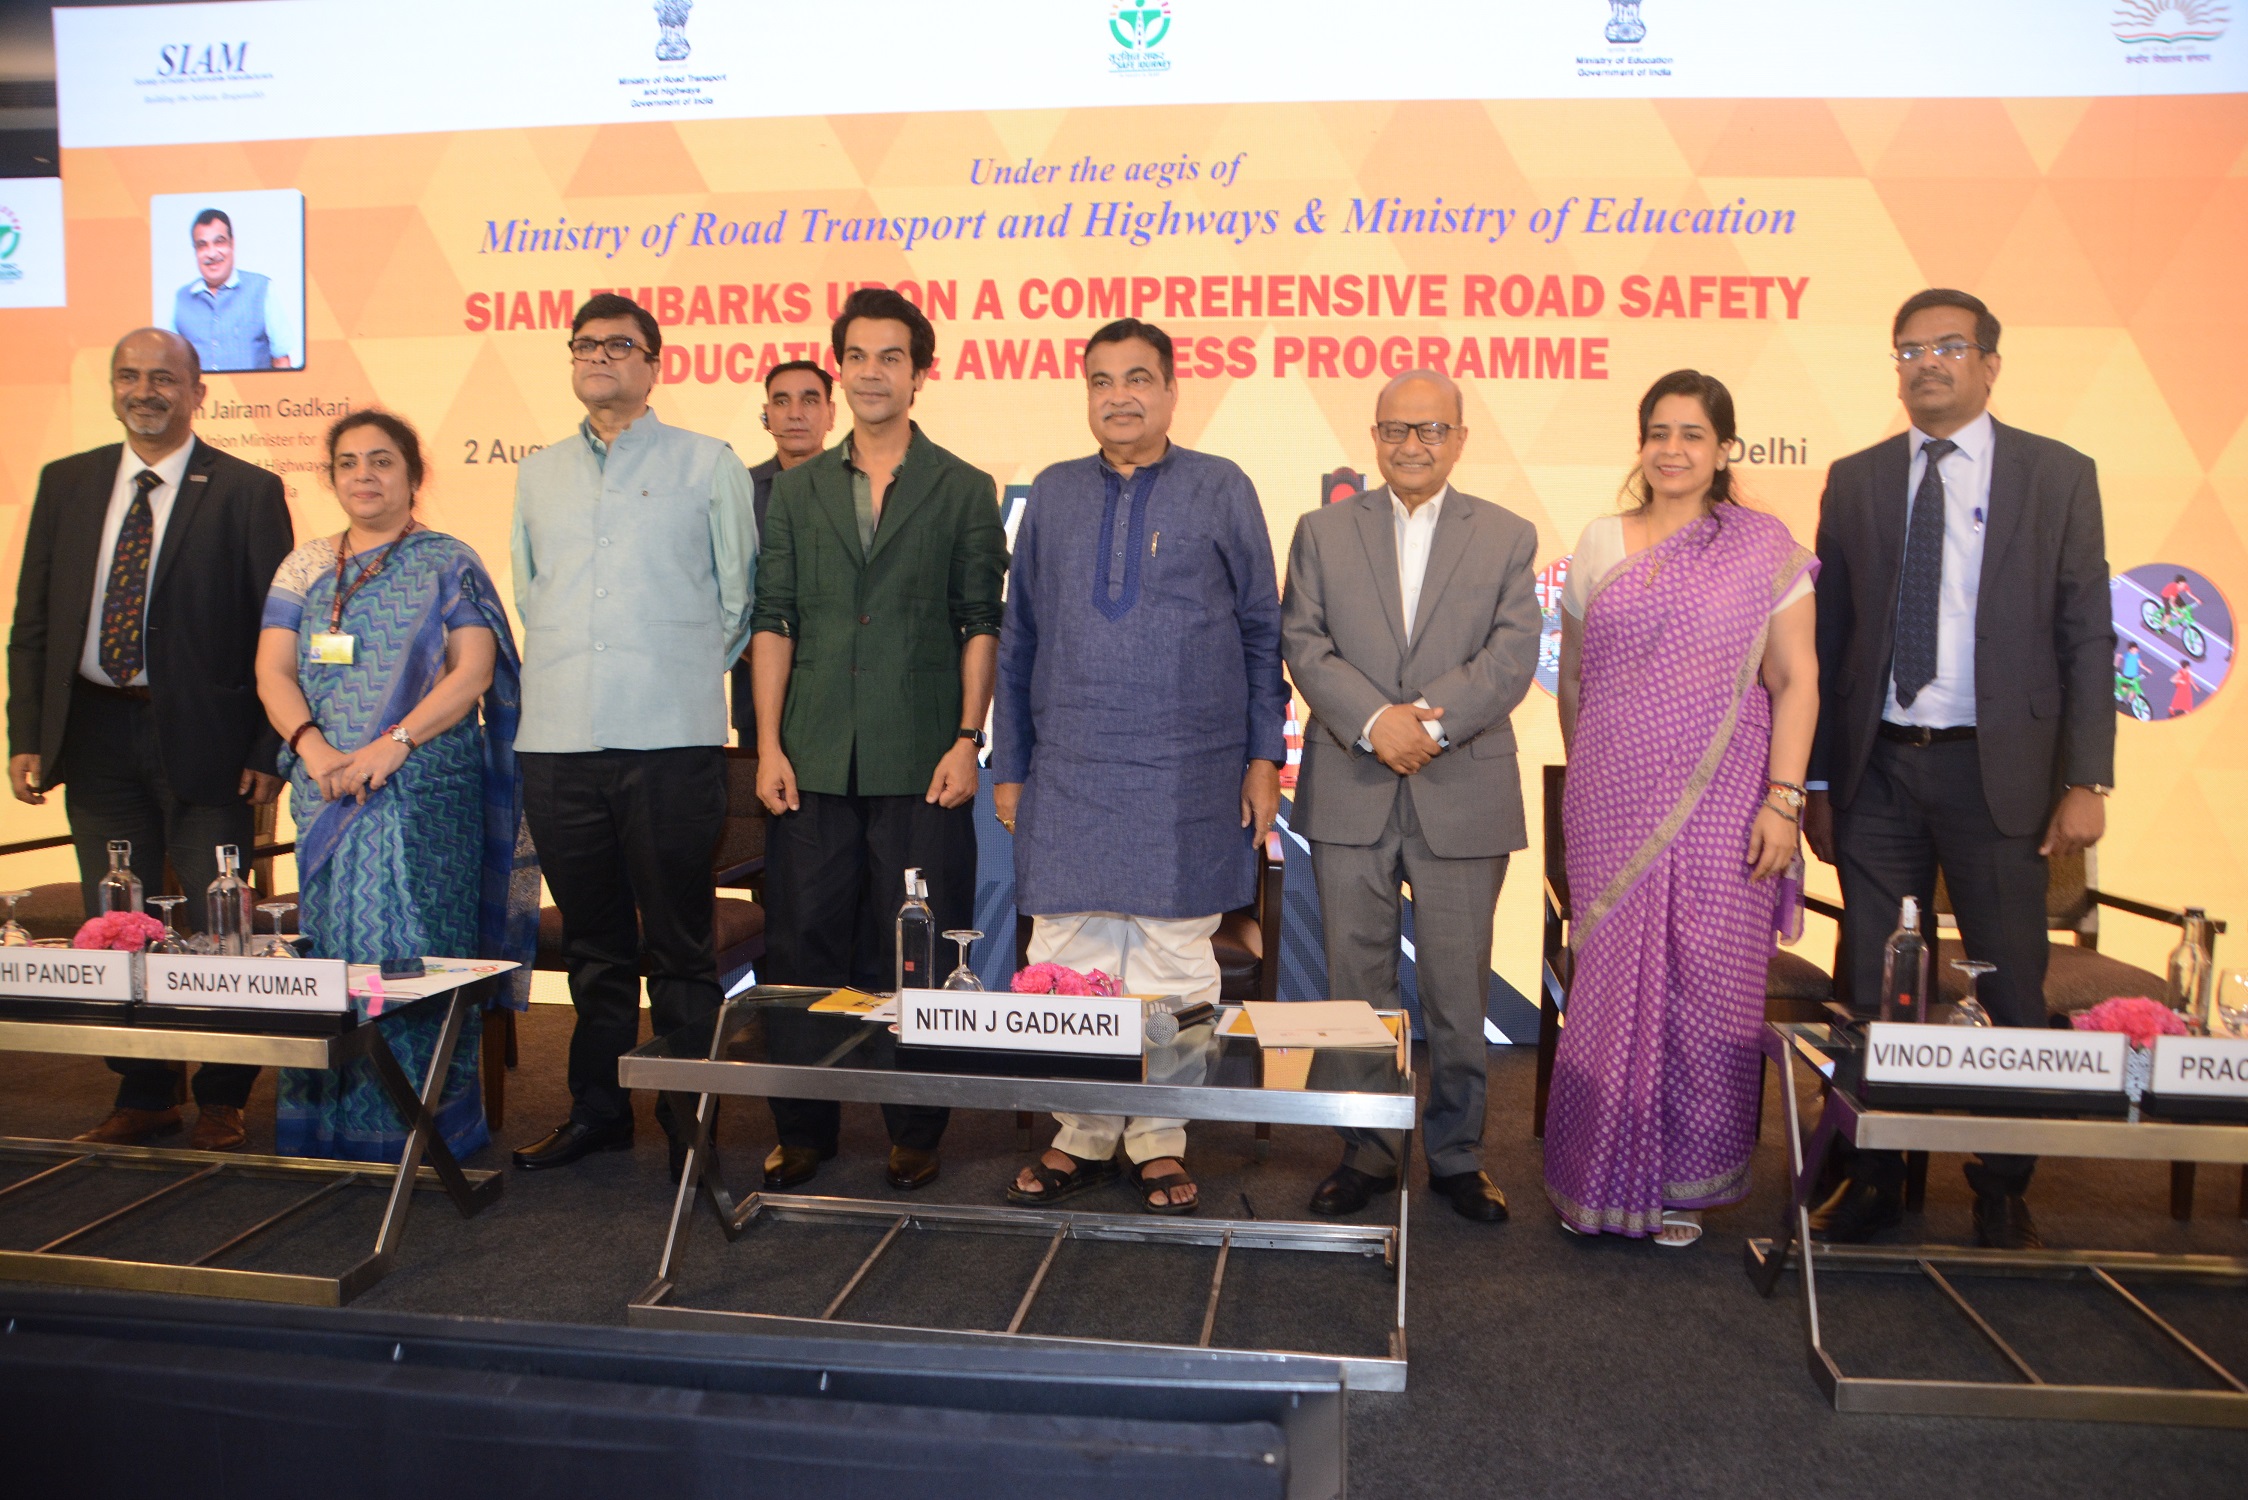 Educating the Future: SIAM Launches "Road Safety Education & Awareness Programme" for School Children